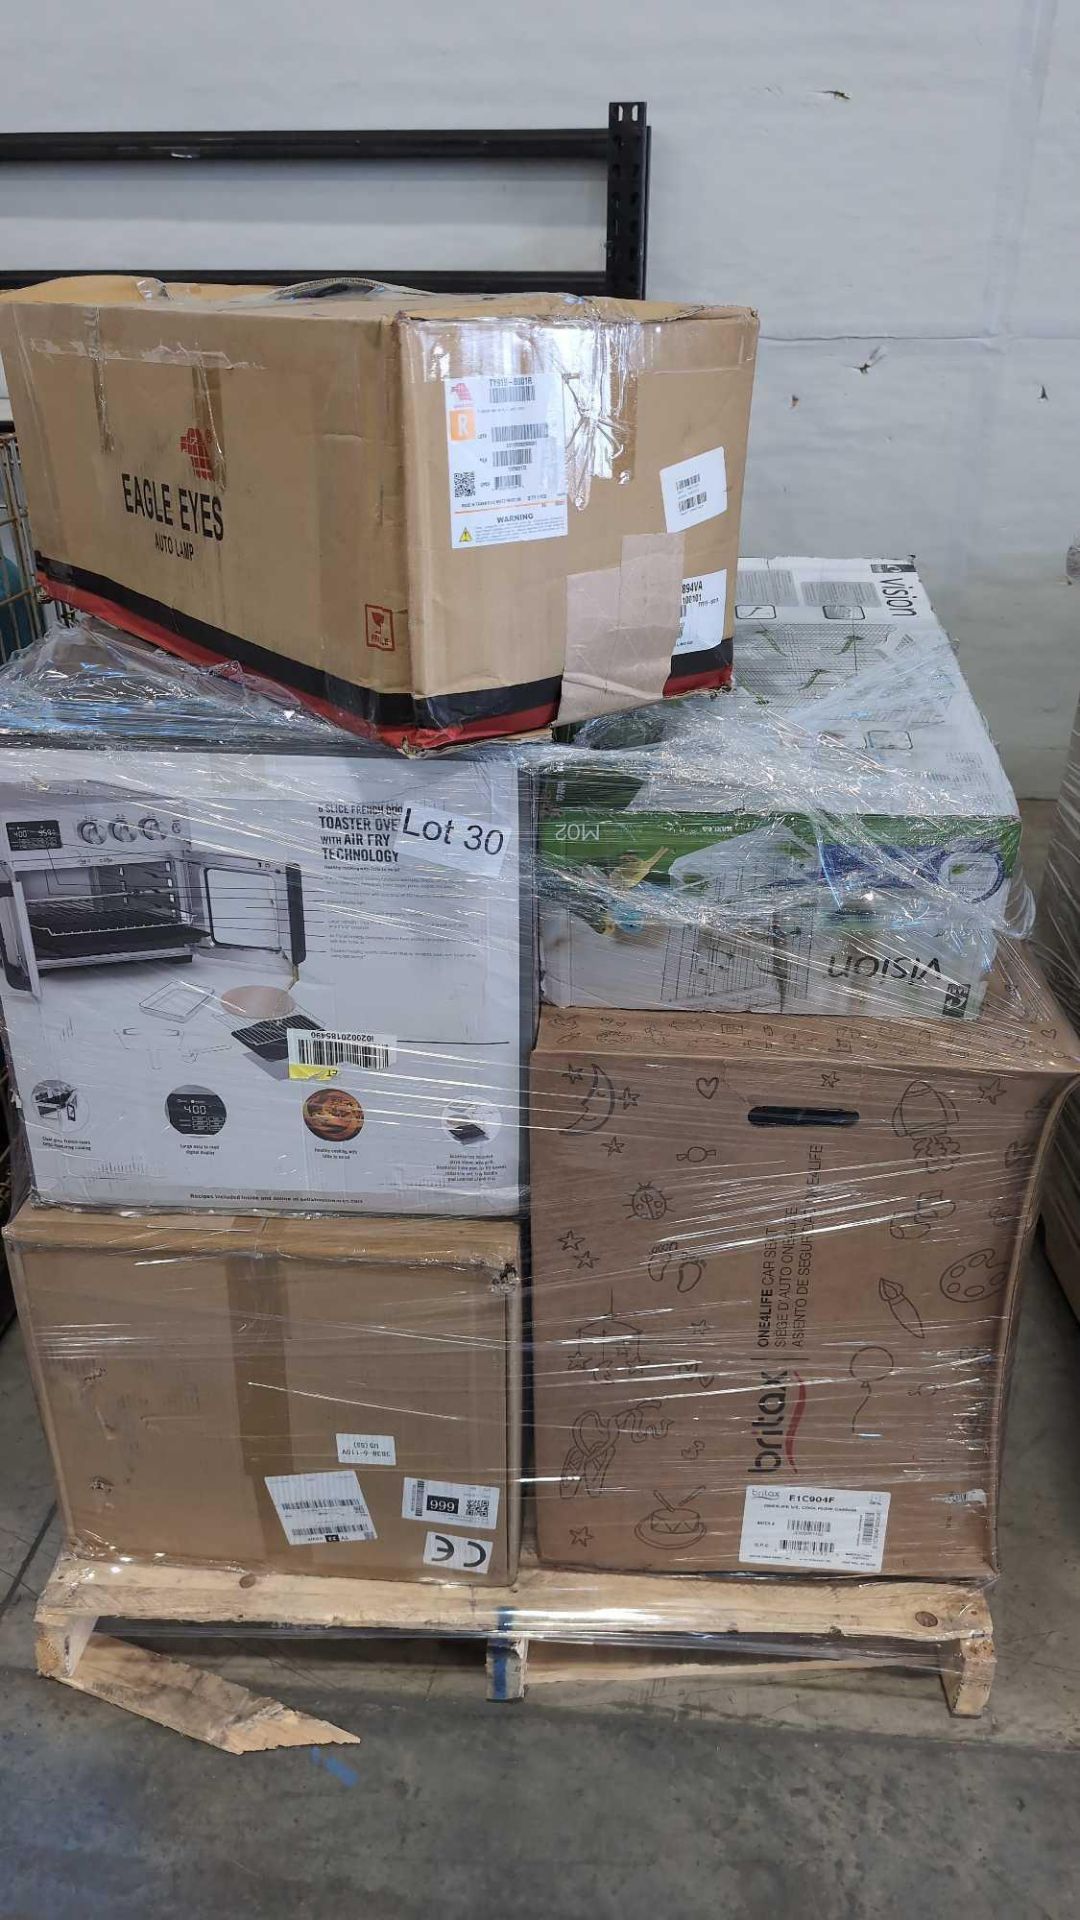 Britax E1C9904F, Bird Cage, Toaster Oven, studeo mcgee chair, eagle eyes and more